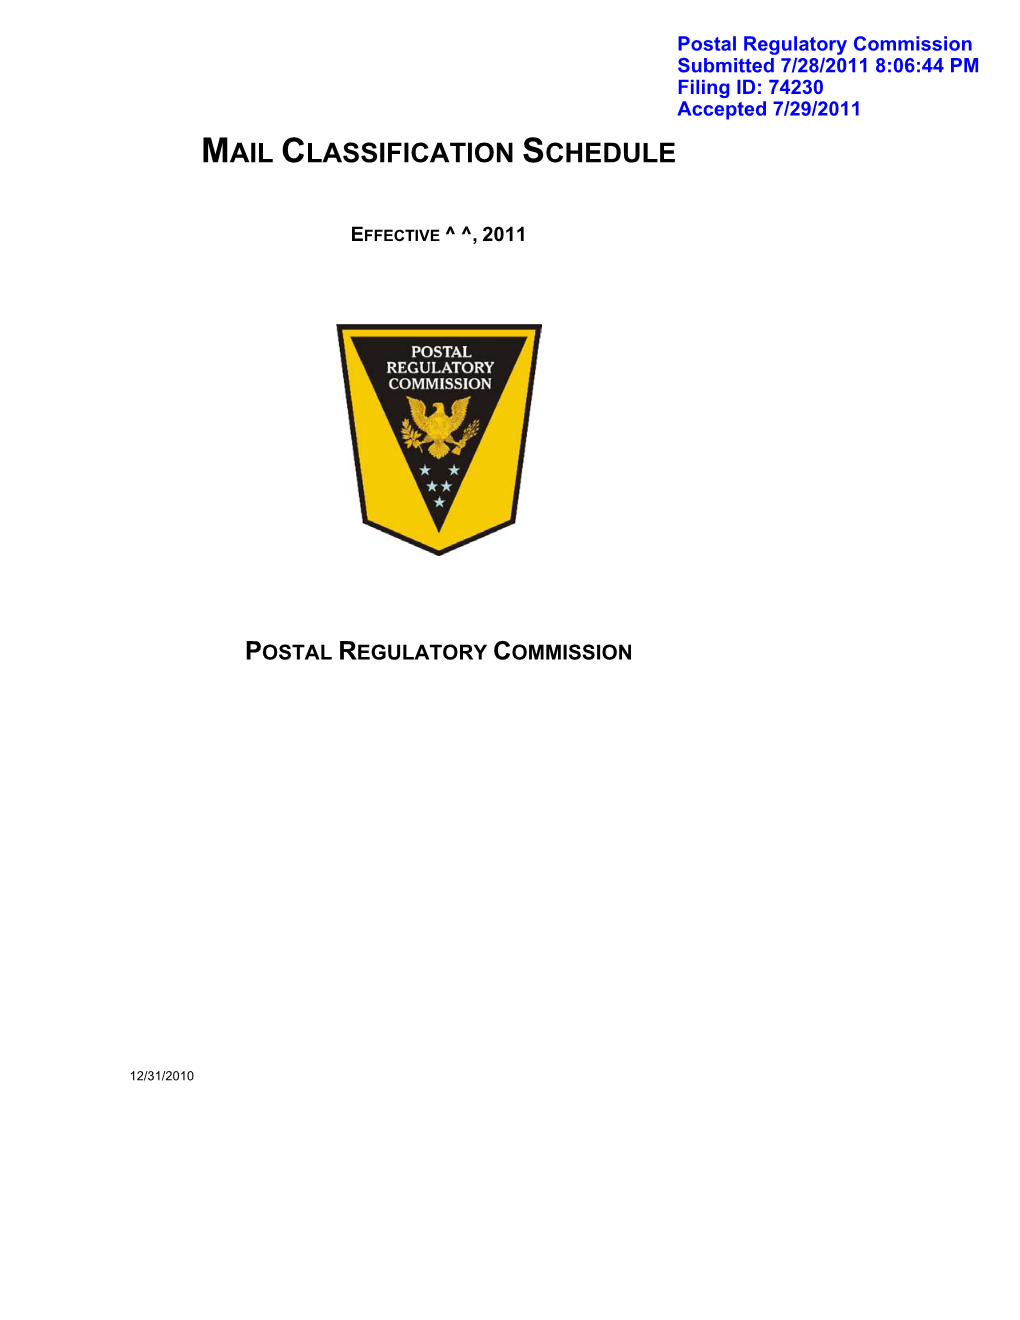 Mail Classification Schedule